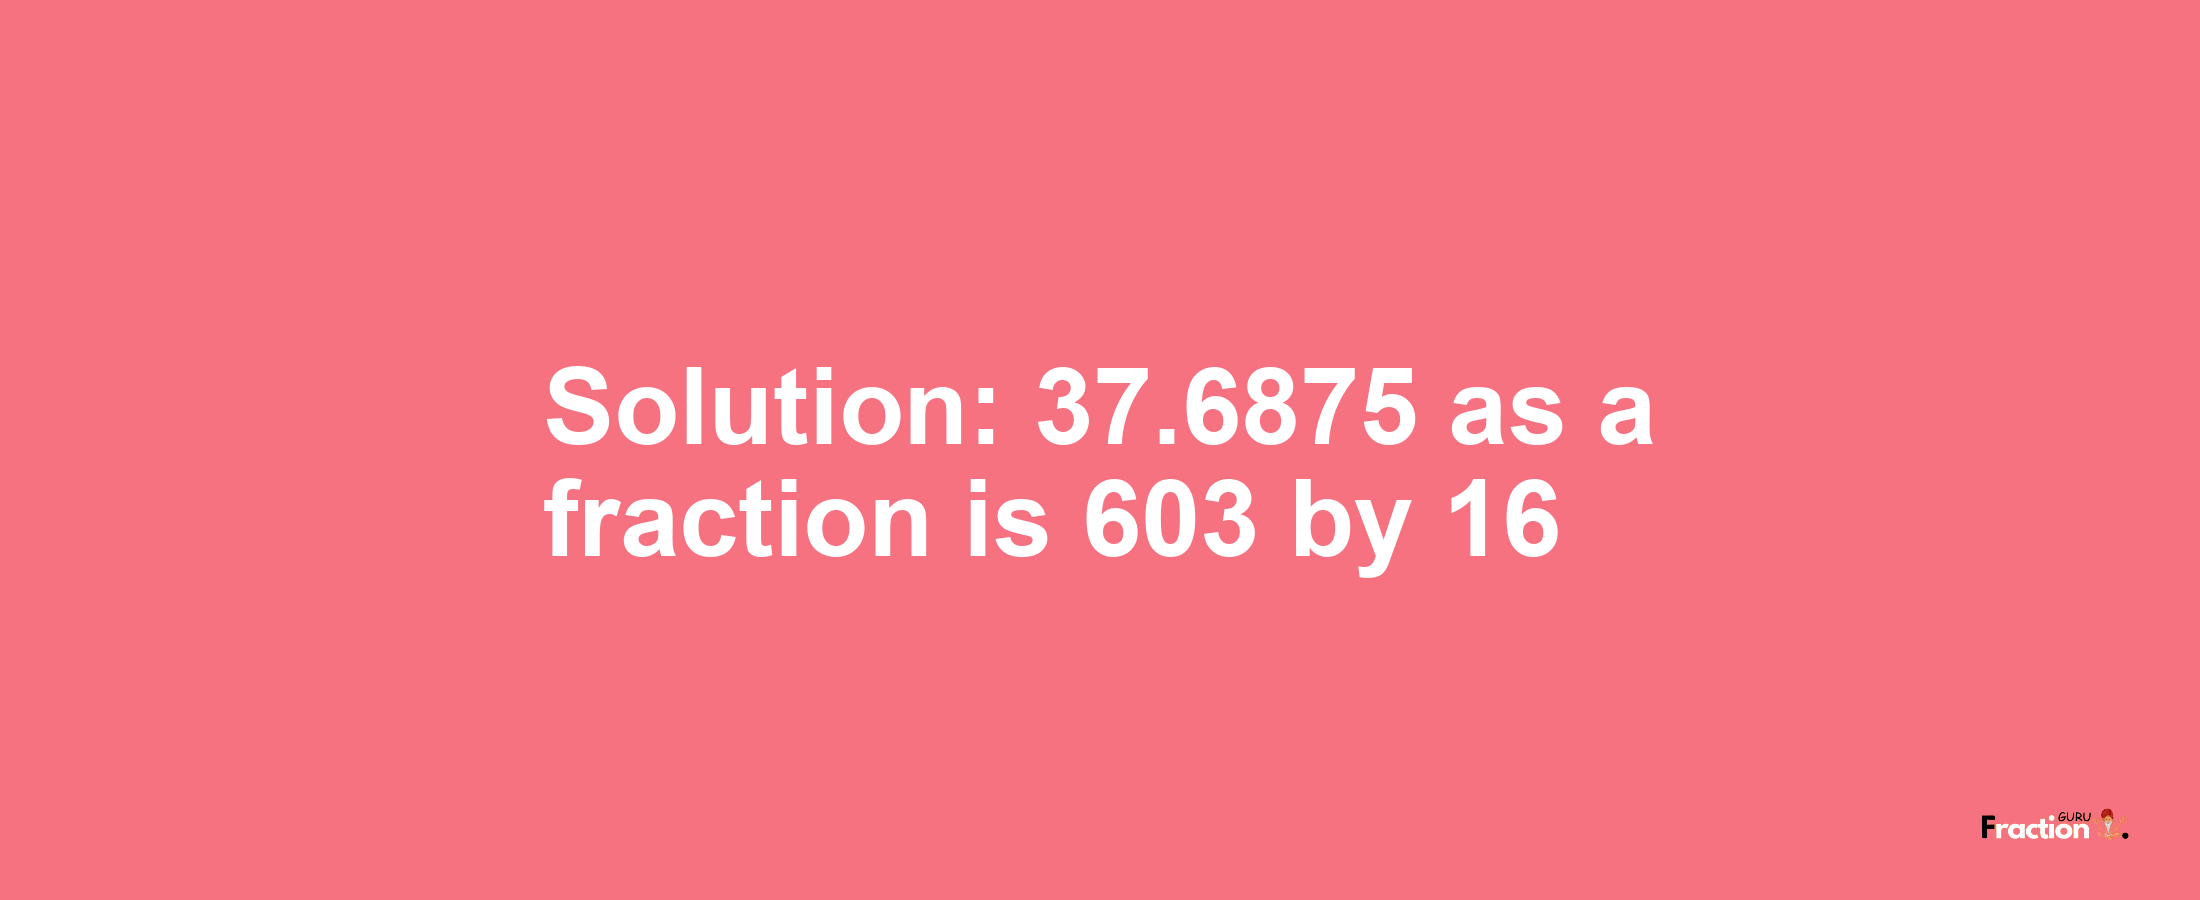 Solution:37.6875 as a fraction is 603/16